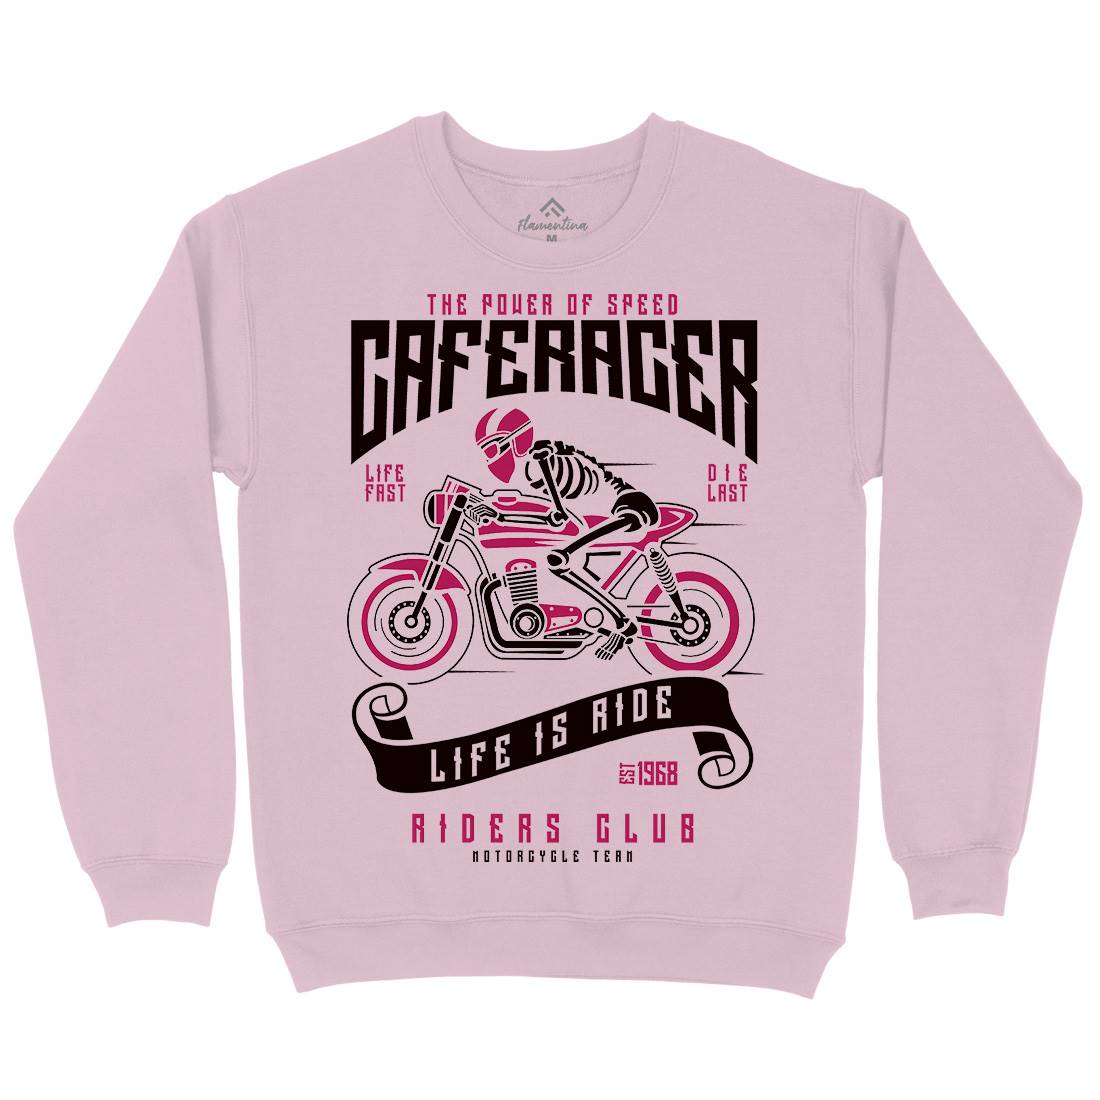 Speed Of Caferacer Kids Crew Neck Sweatshirt Motorcycles A154